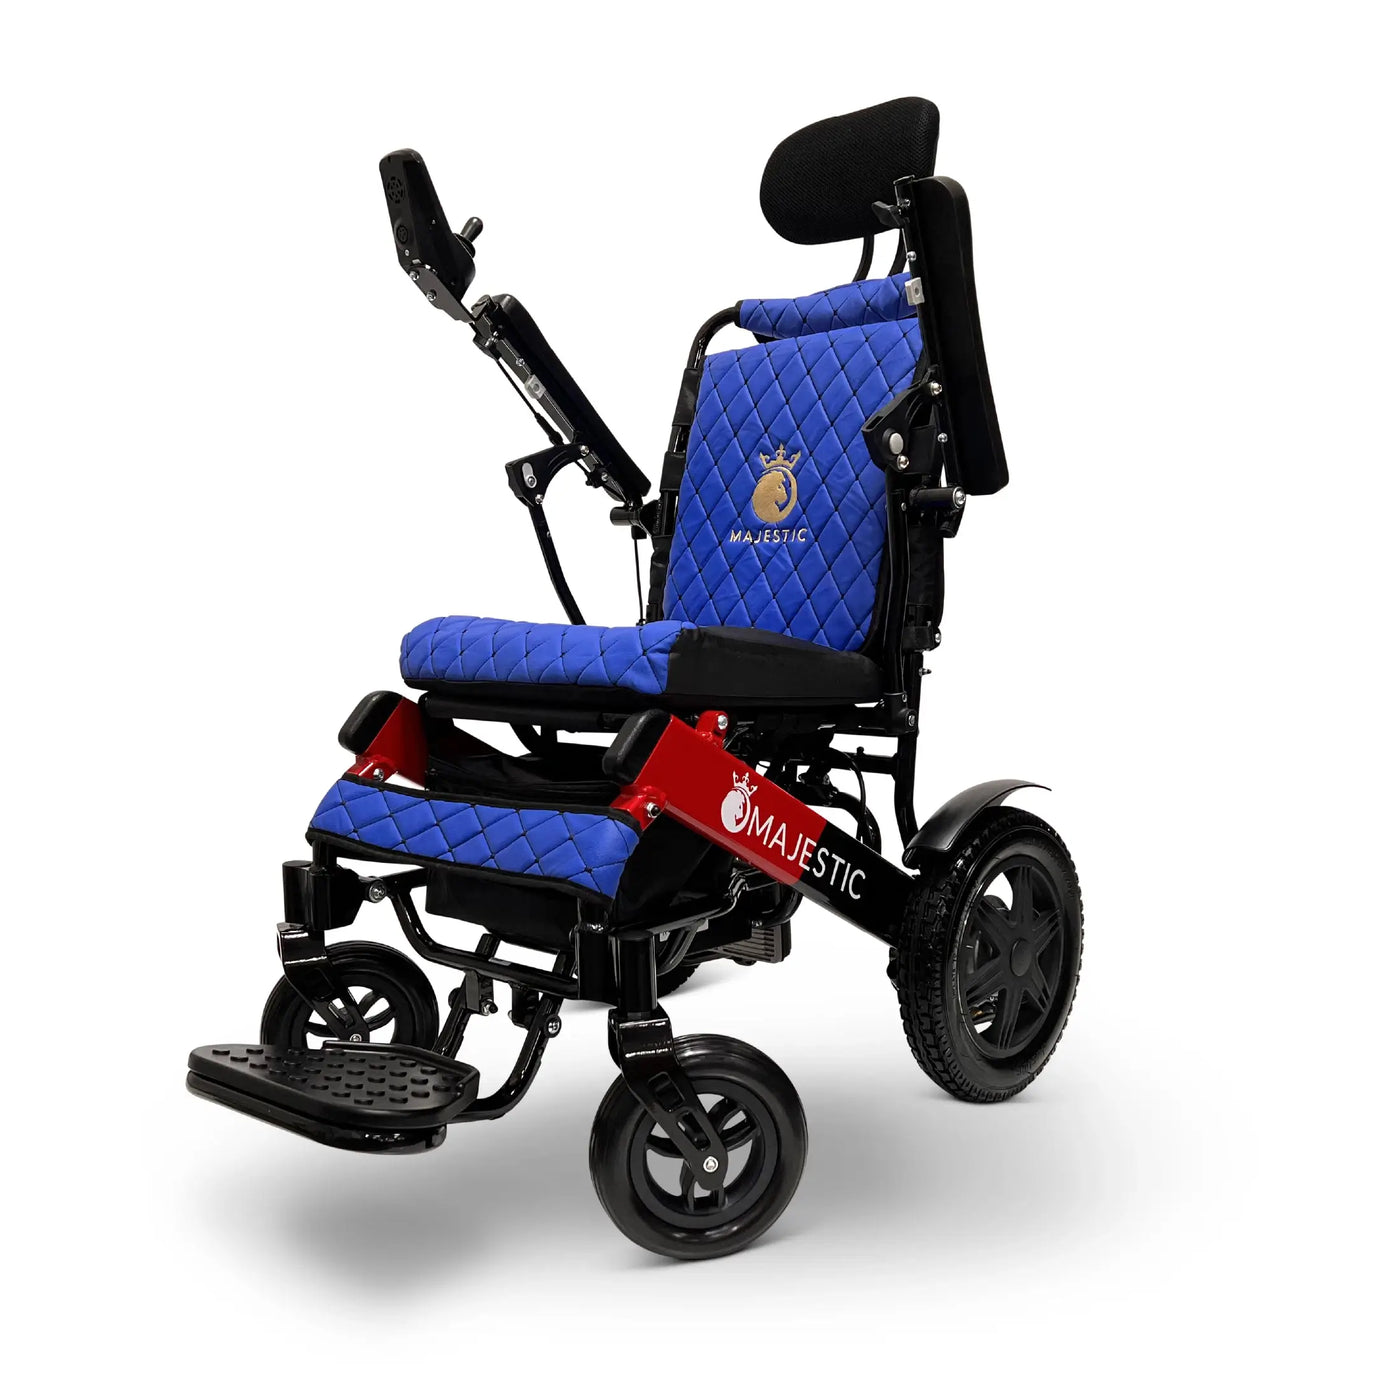 MAJESTIC IQ-9000 Remote Controlled  Lightweight Electric Wheelchair